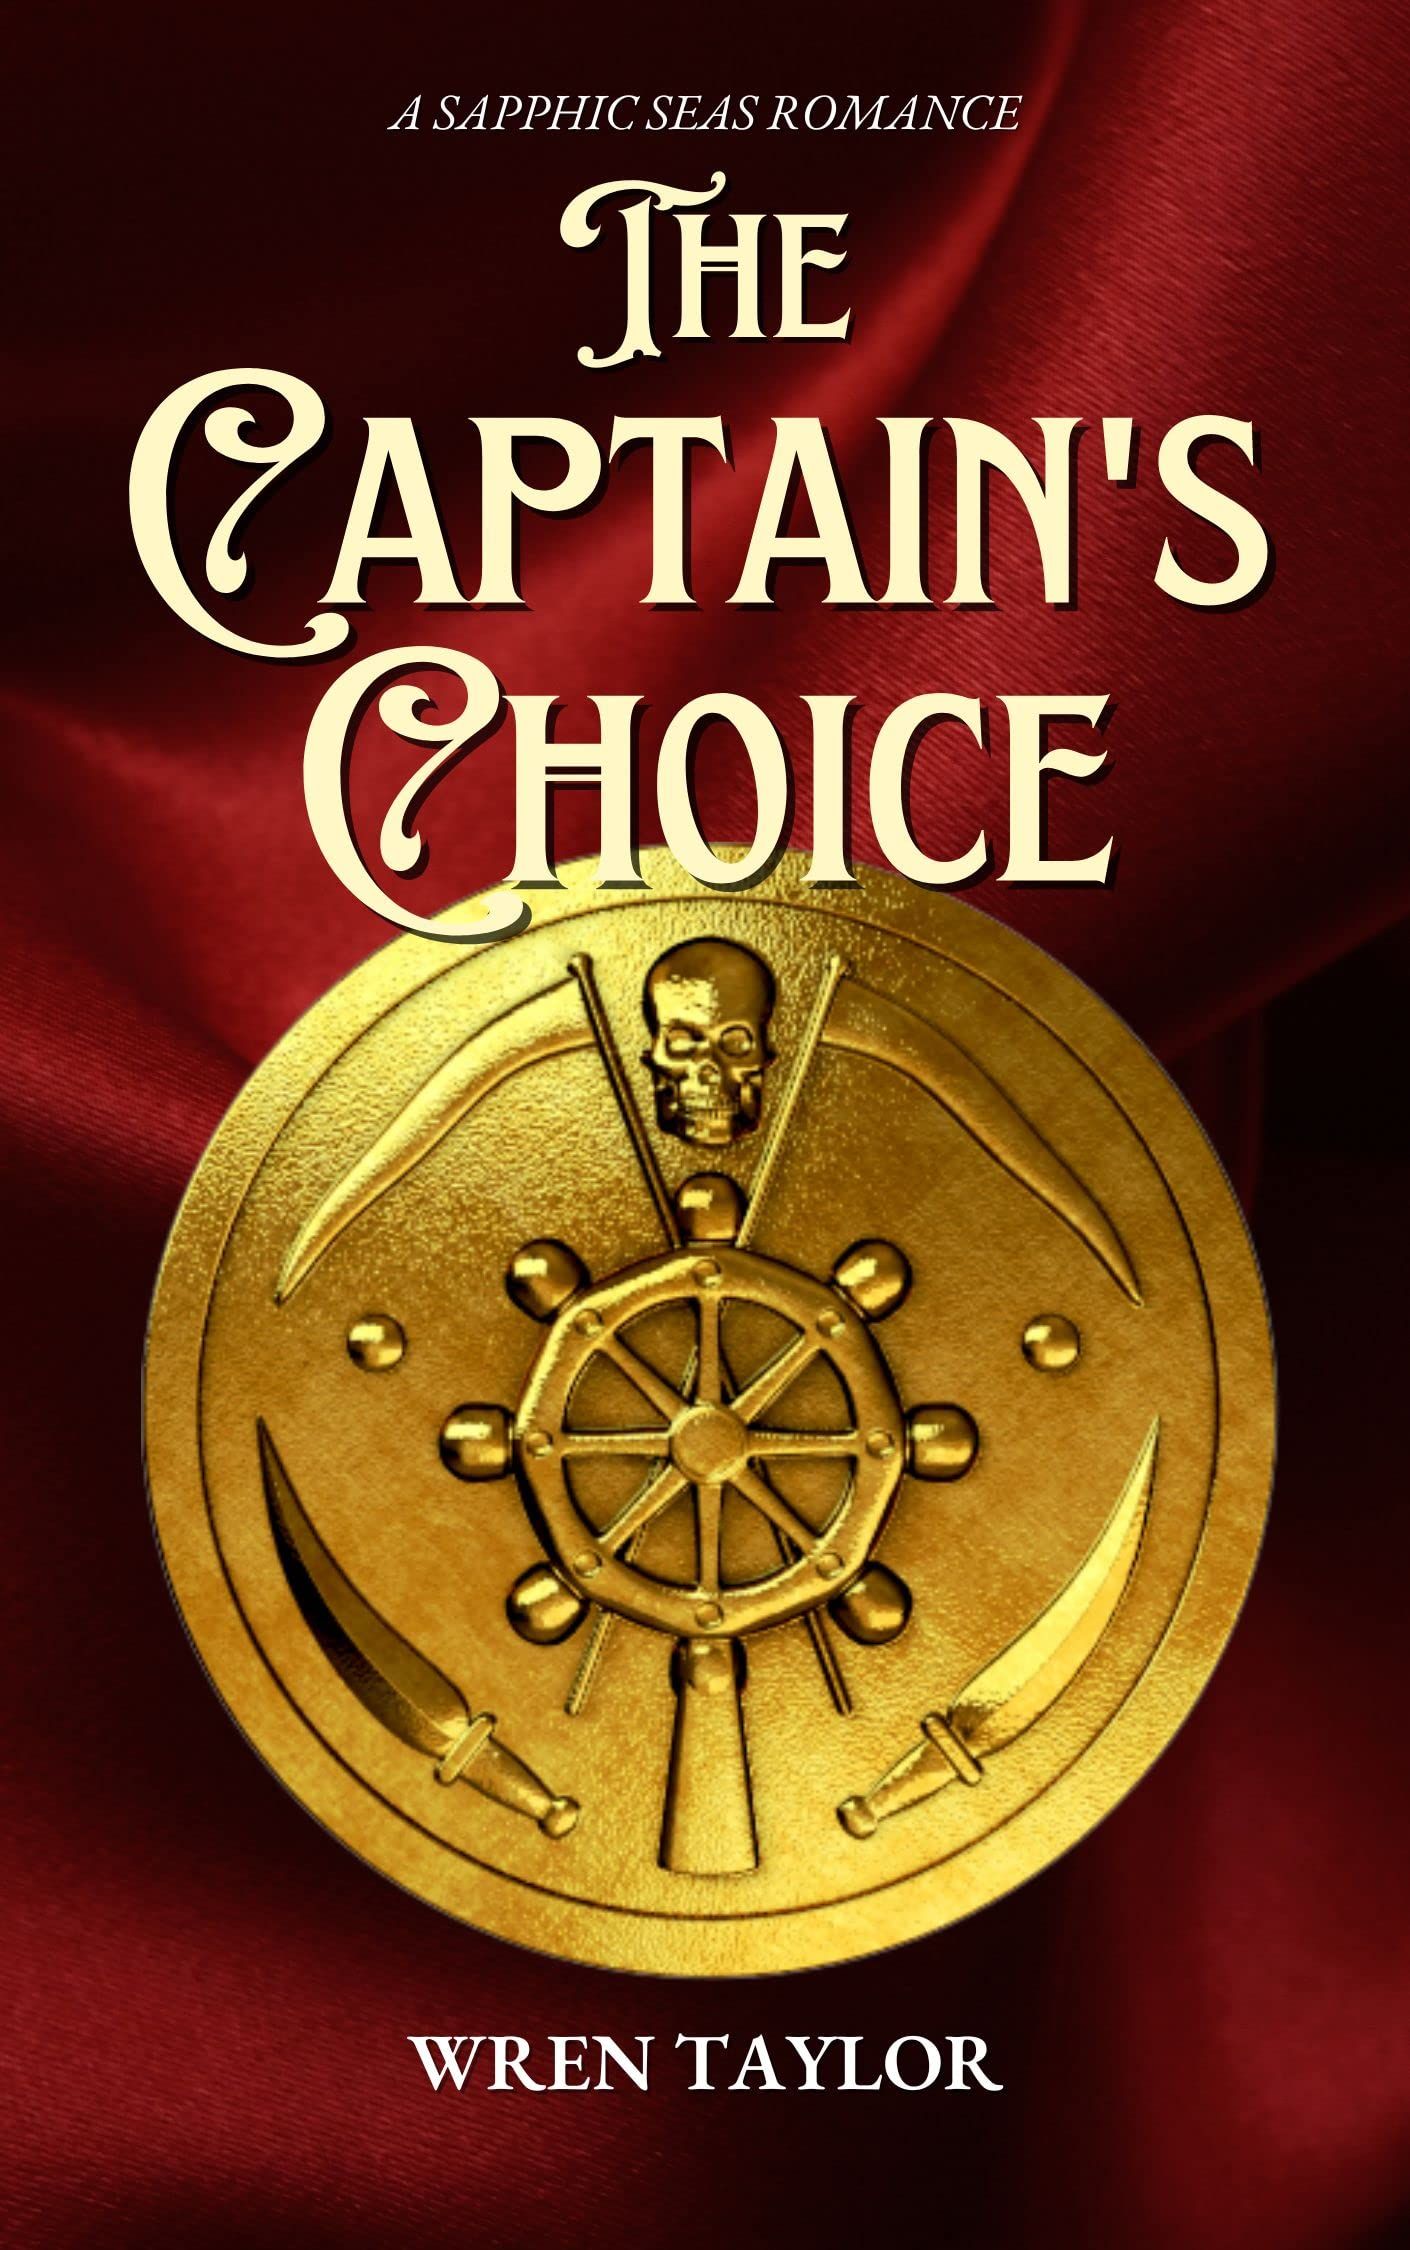 The Captain's Choice by Wren Taylor Book Cover